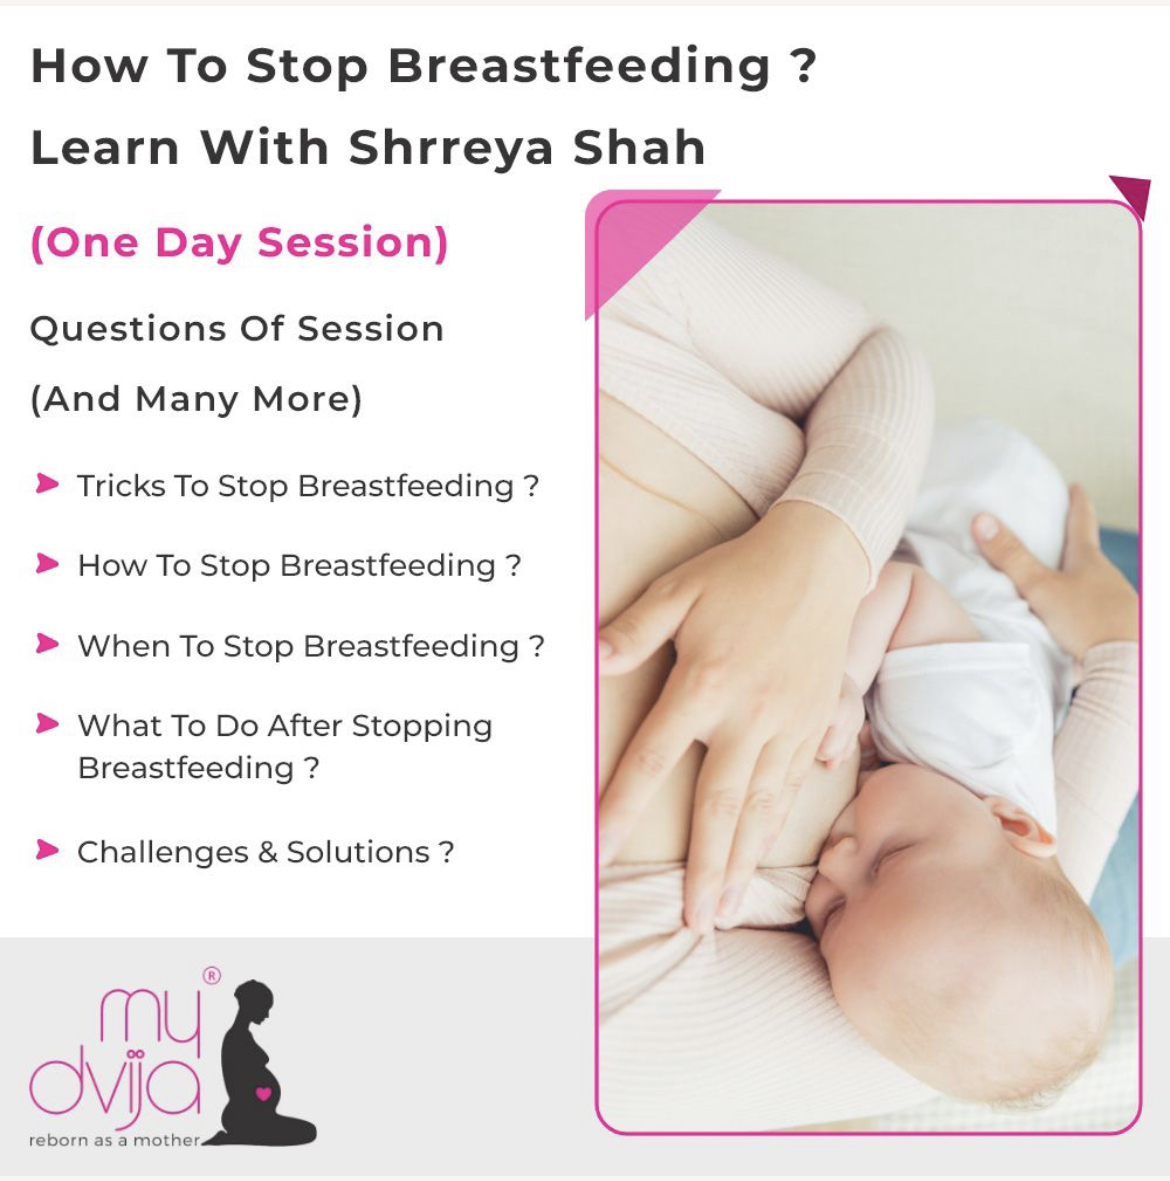 When and How To Stop Breastfeeding